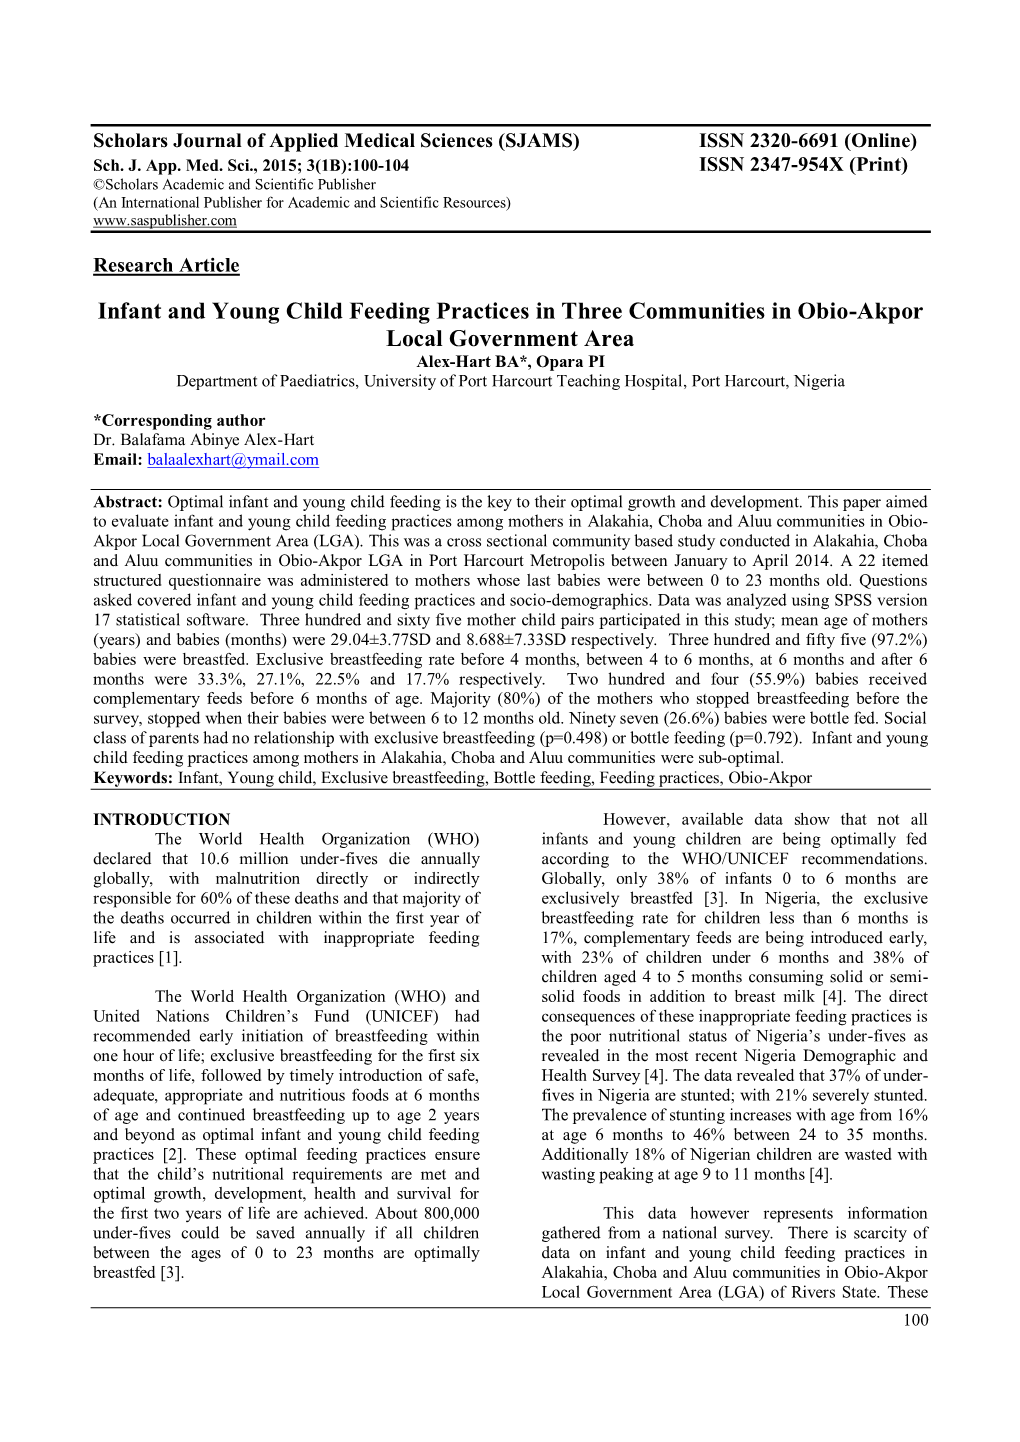 Infant and Young Child Feeding Practices in Three Communities In